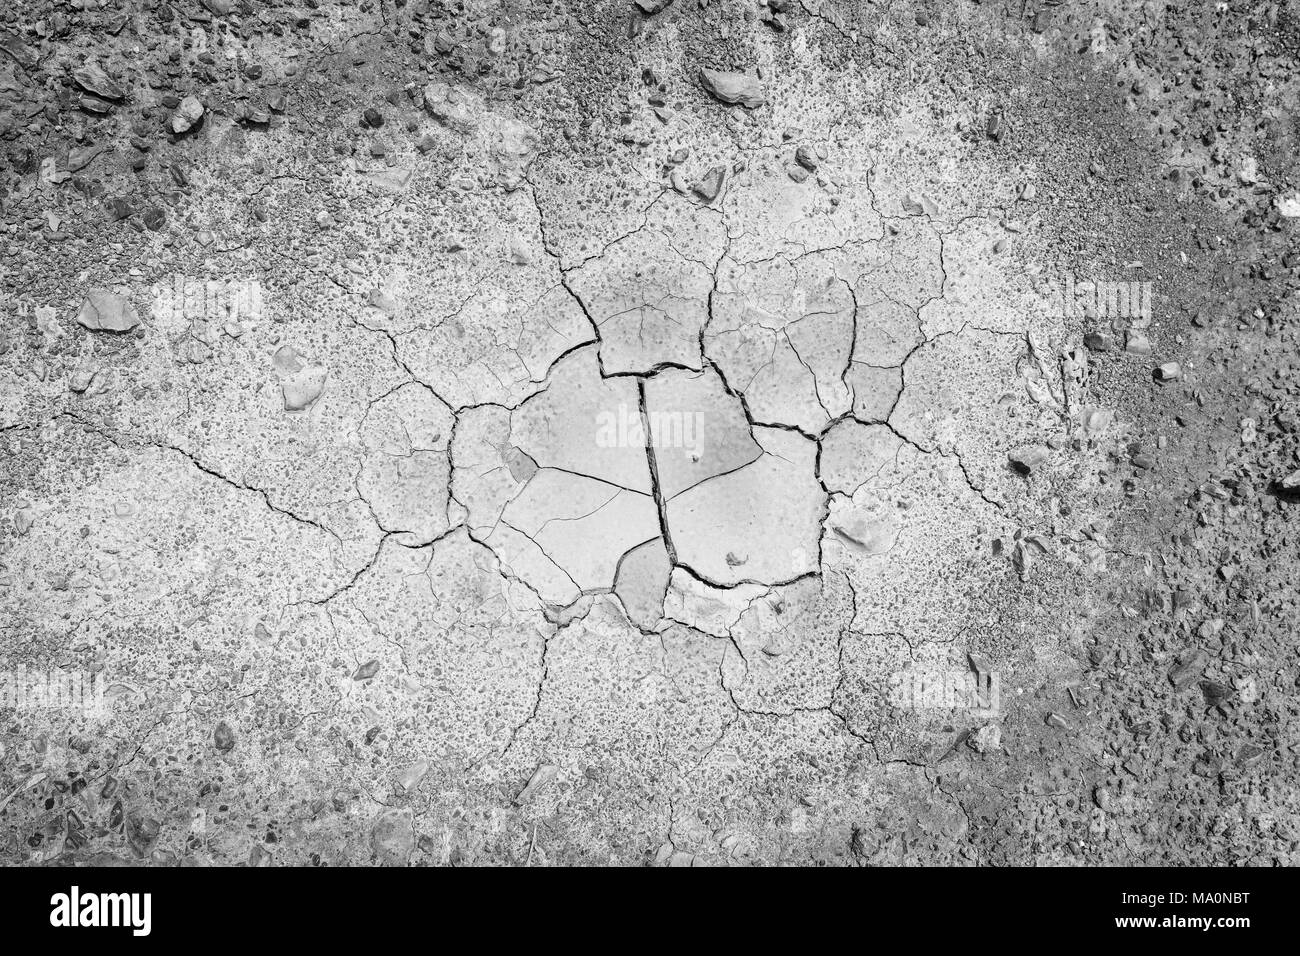 Stones and dry and cracked soil ground during drought, viewed from above in black and white with vignette. Stock Photo